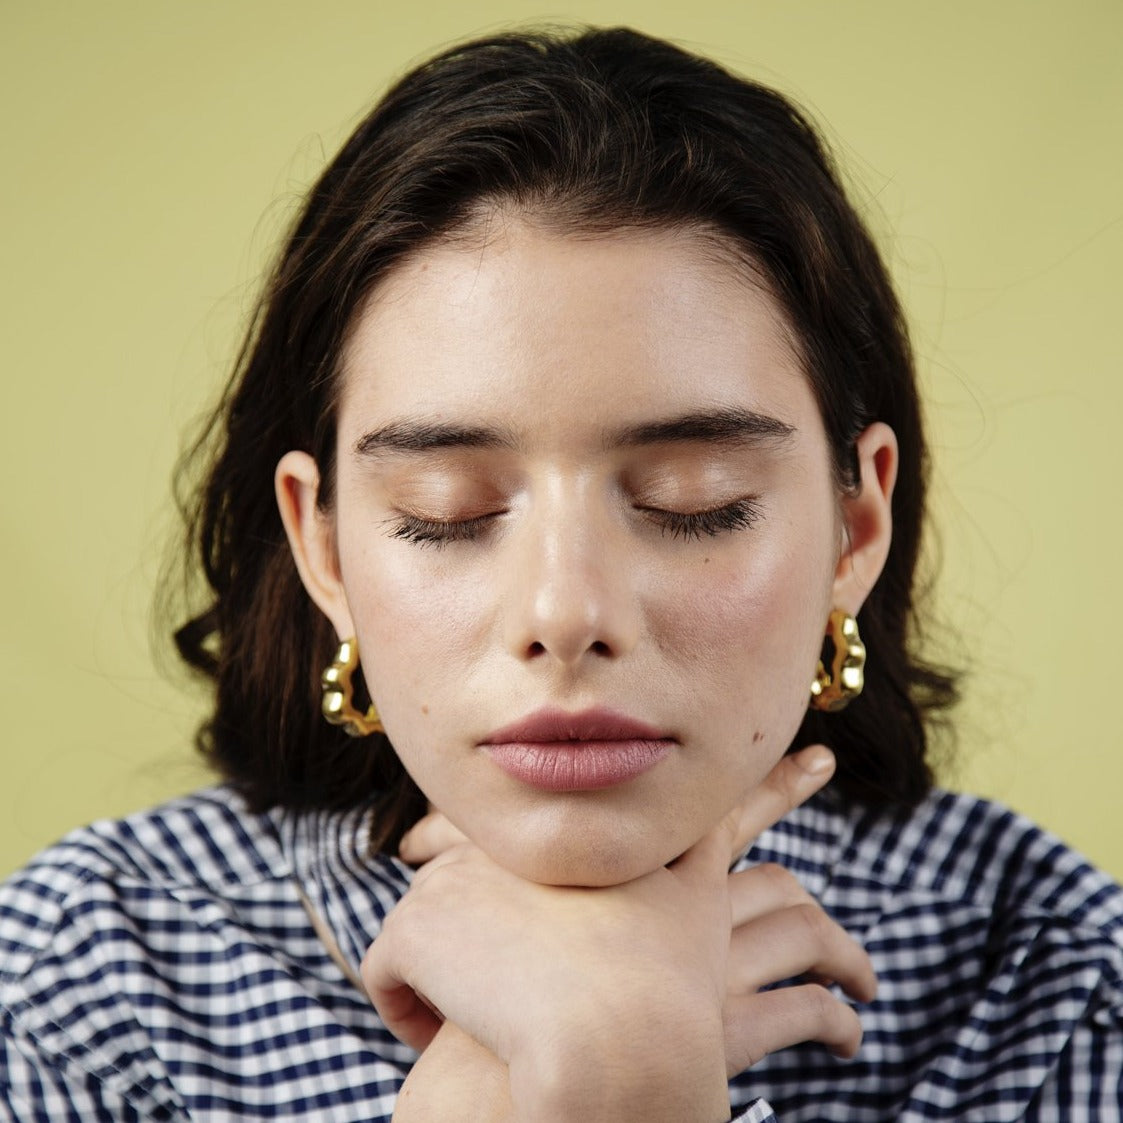 Close up of woman with closed eyes leaning on her folded hands. Wearing gold earrings